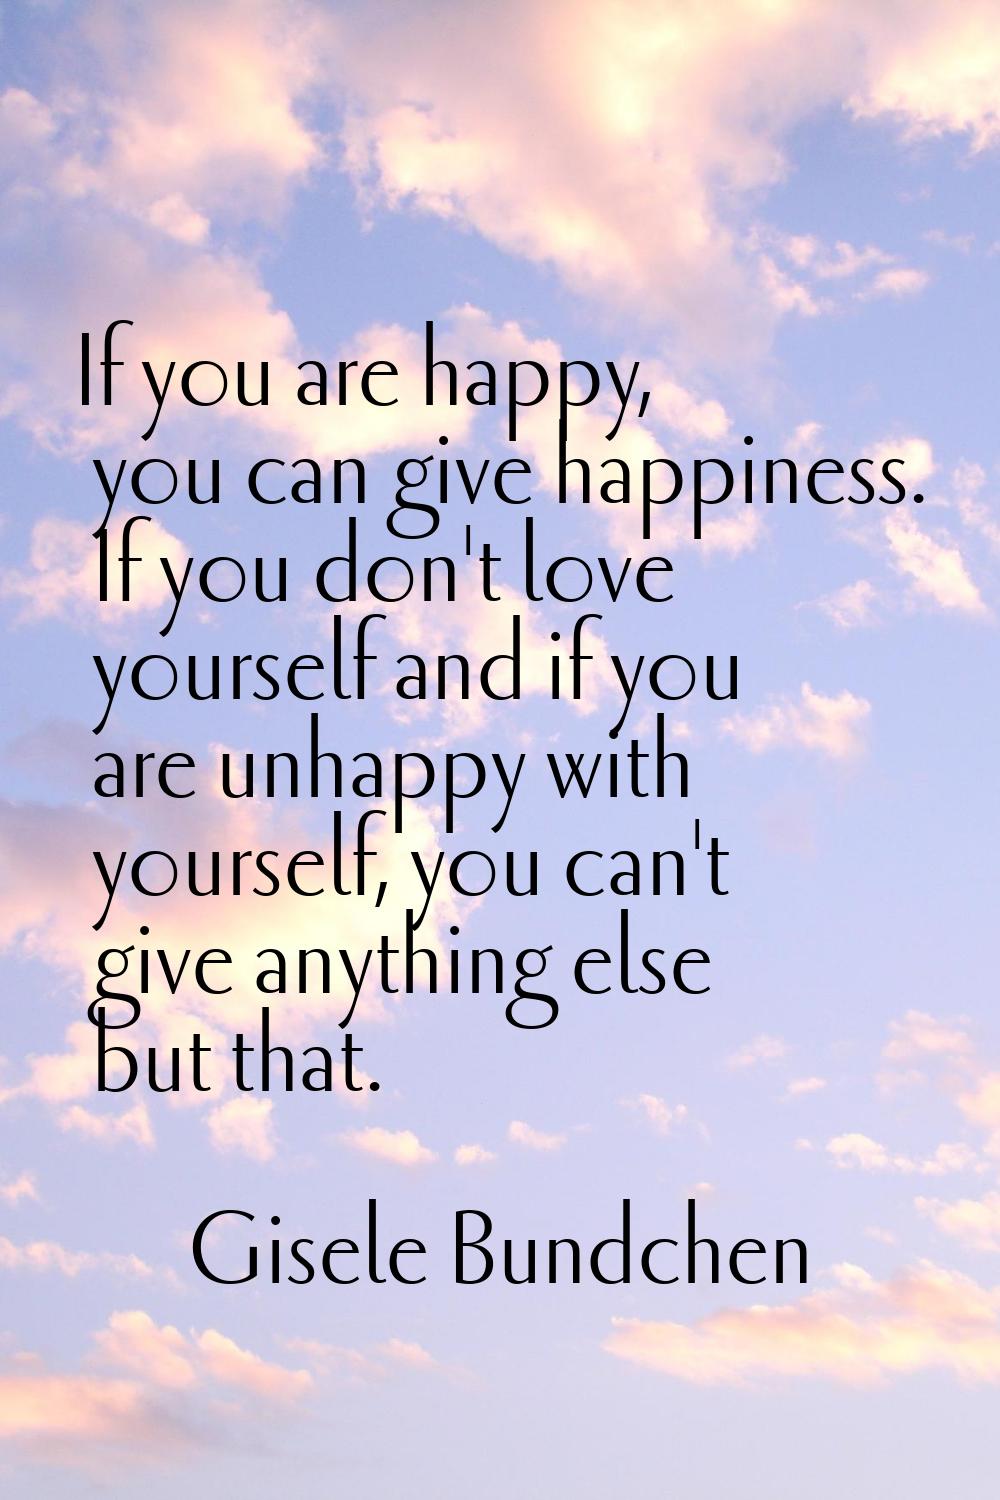 If you are happy, you can give happiness. If you don't love yourself and if you are unhappy with yo